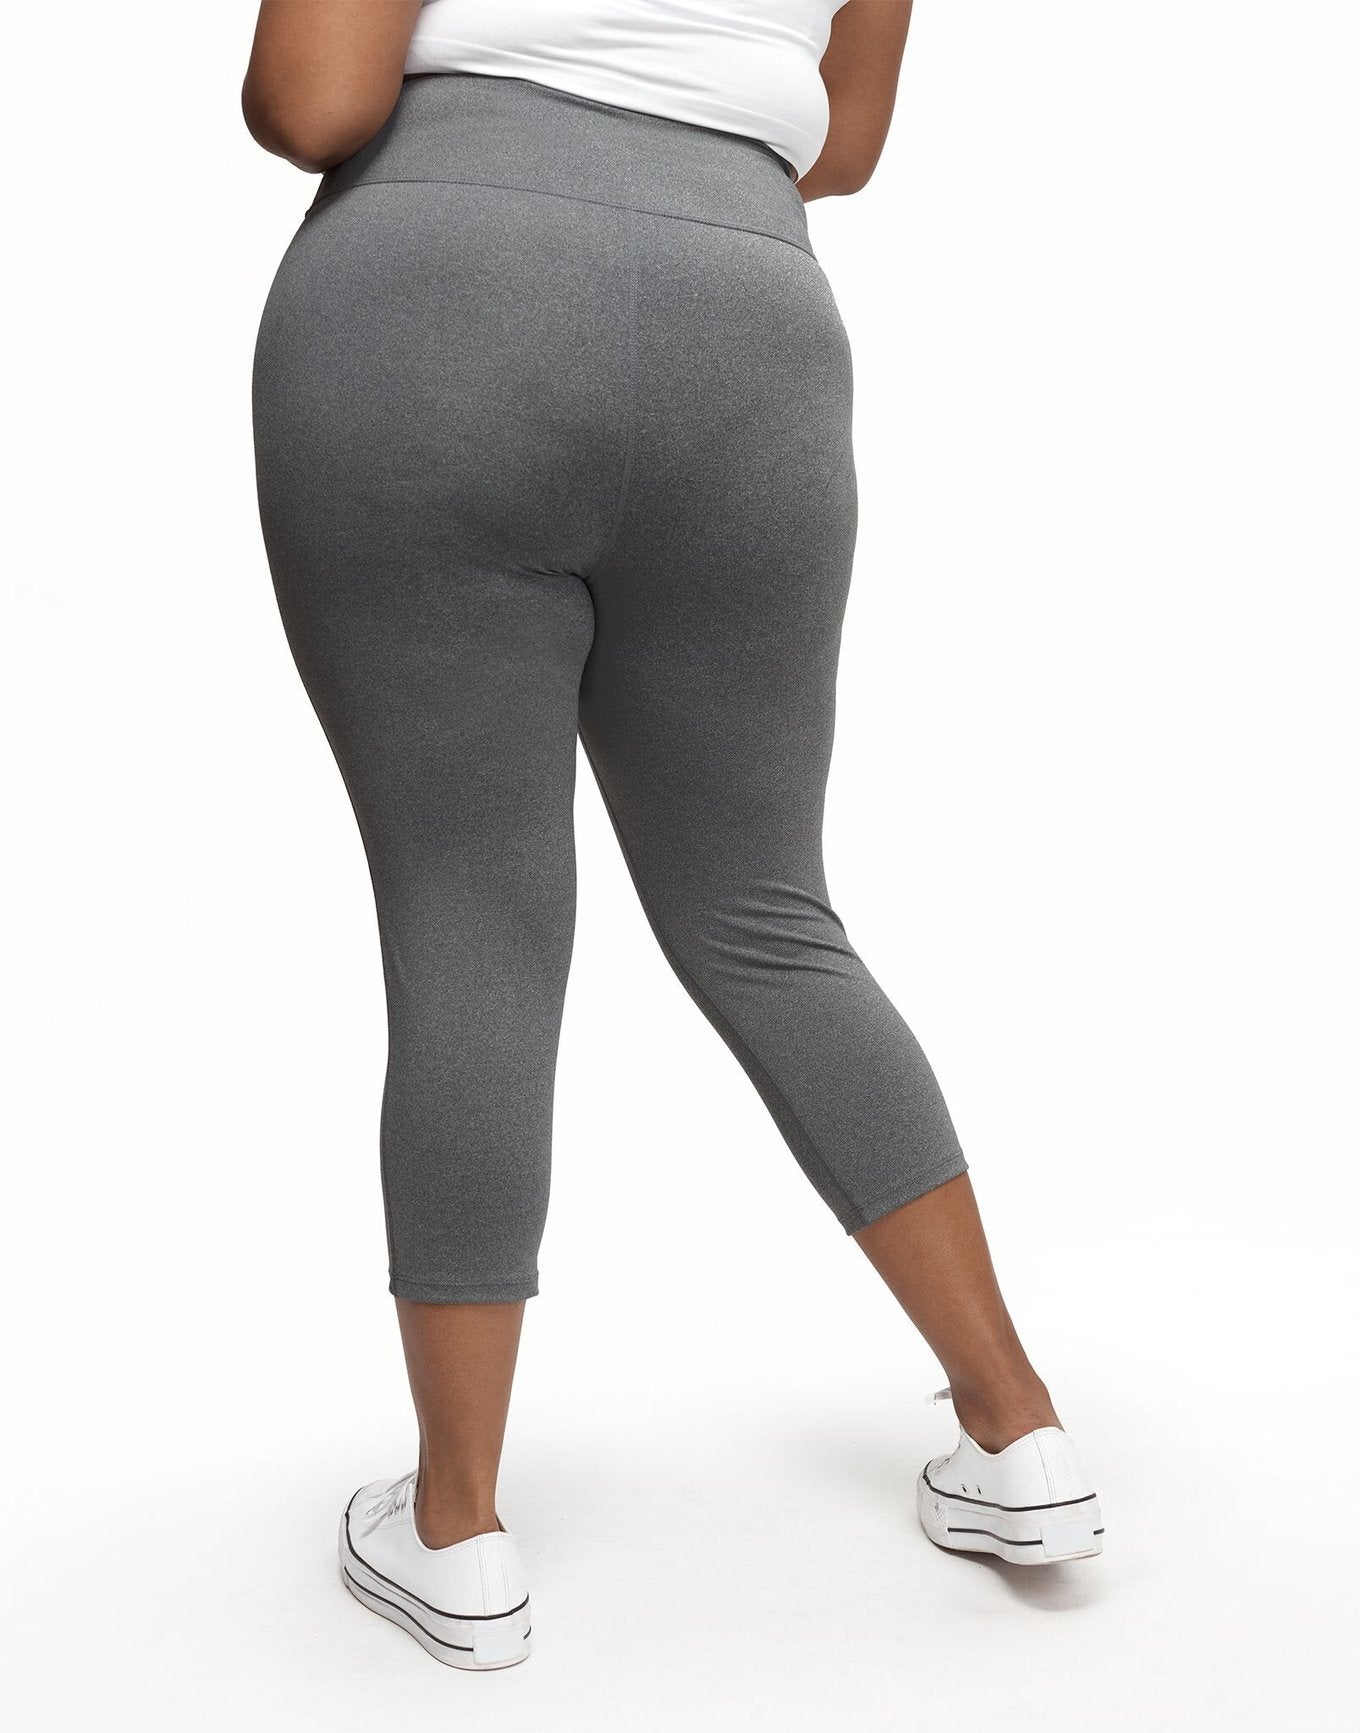 Adore Me Haley Heathered Crop Heather Compression Activewear Crop Legging in color Meteorite Light Heather and shape legging